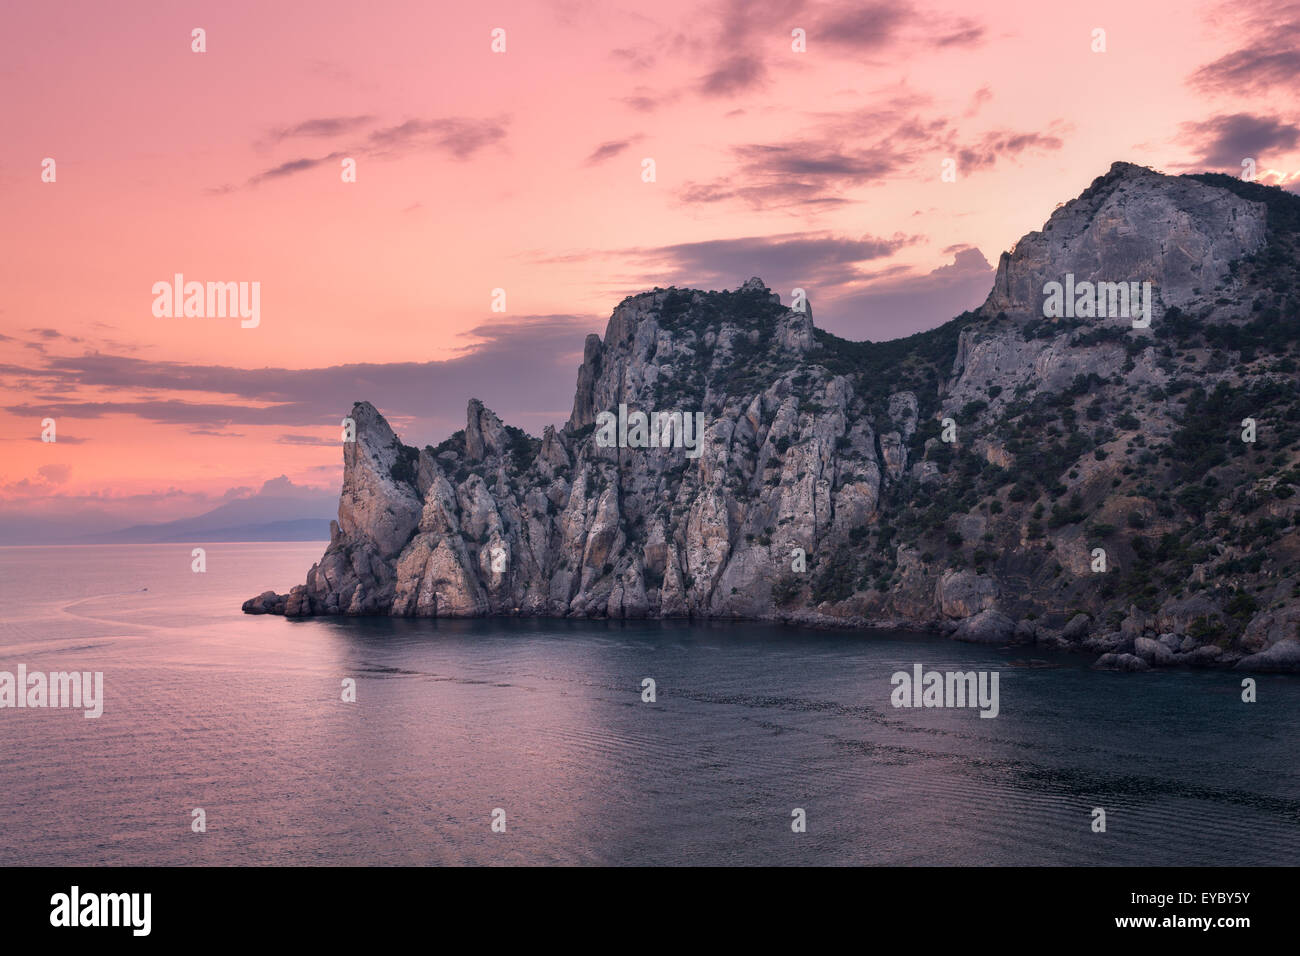 Beautiful summer sunset at the sea with mountains, stones, trees and cloudy sky in Crimea. Dusk, Twilight. Stock Photo